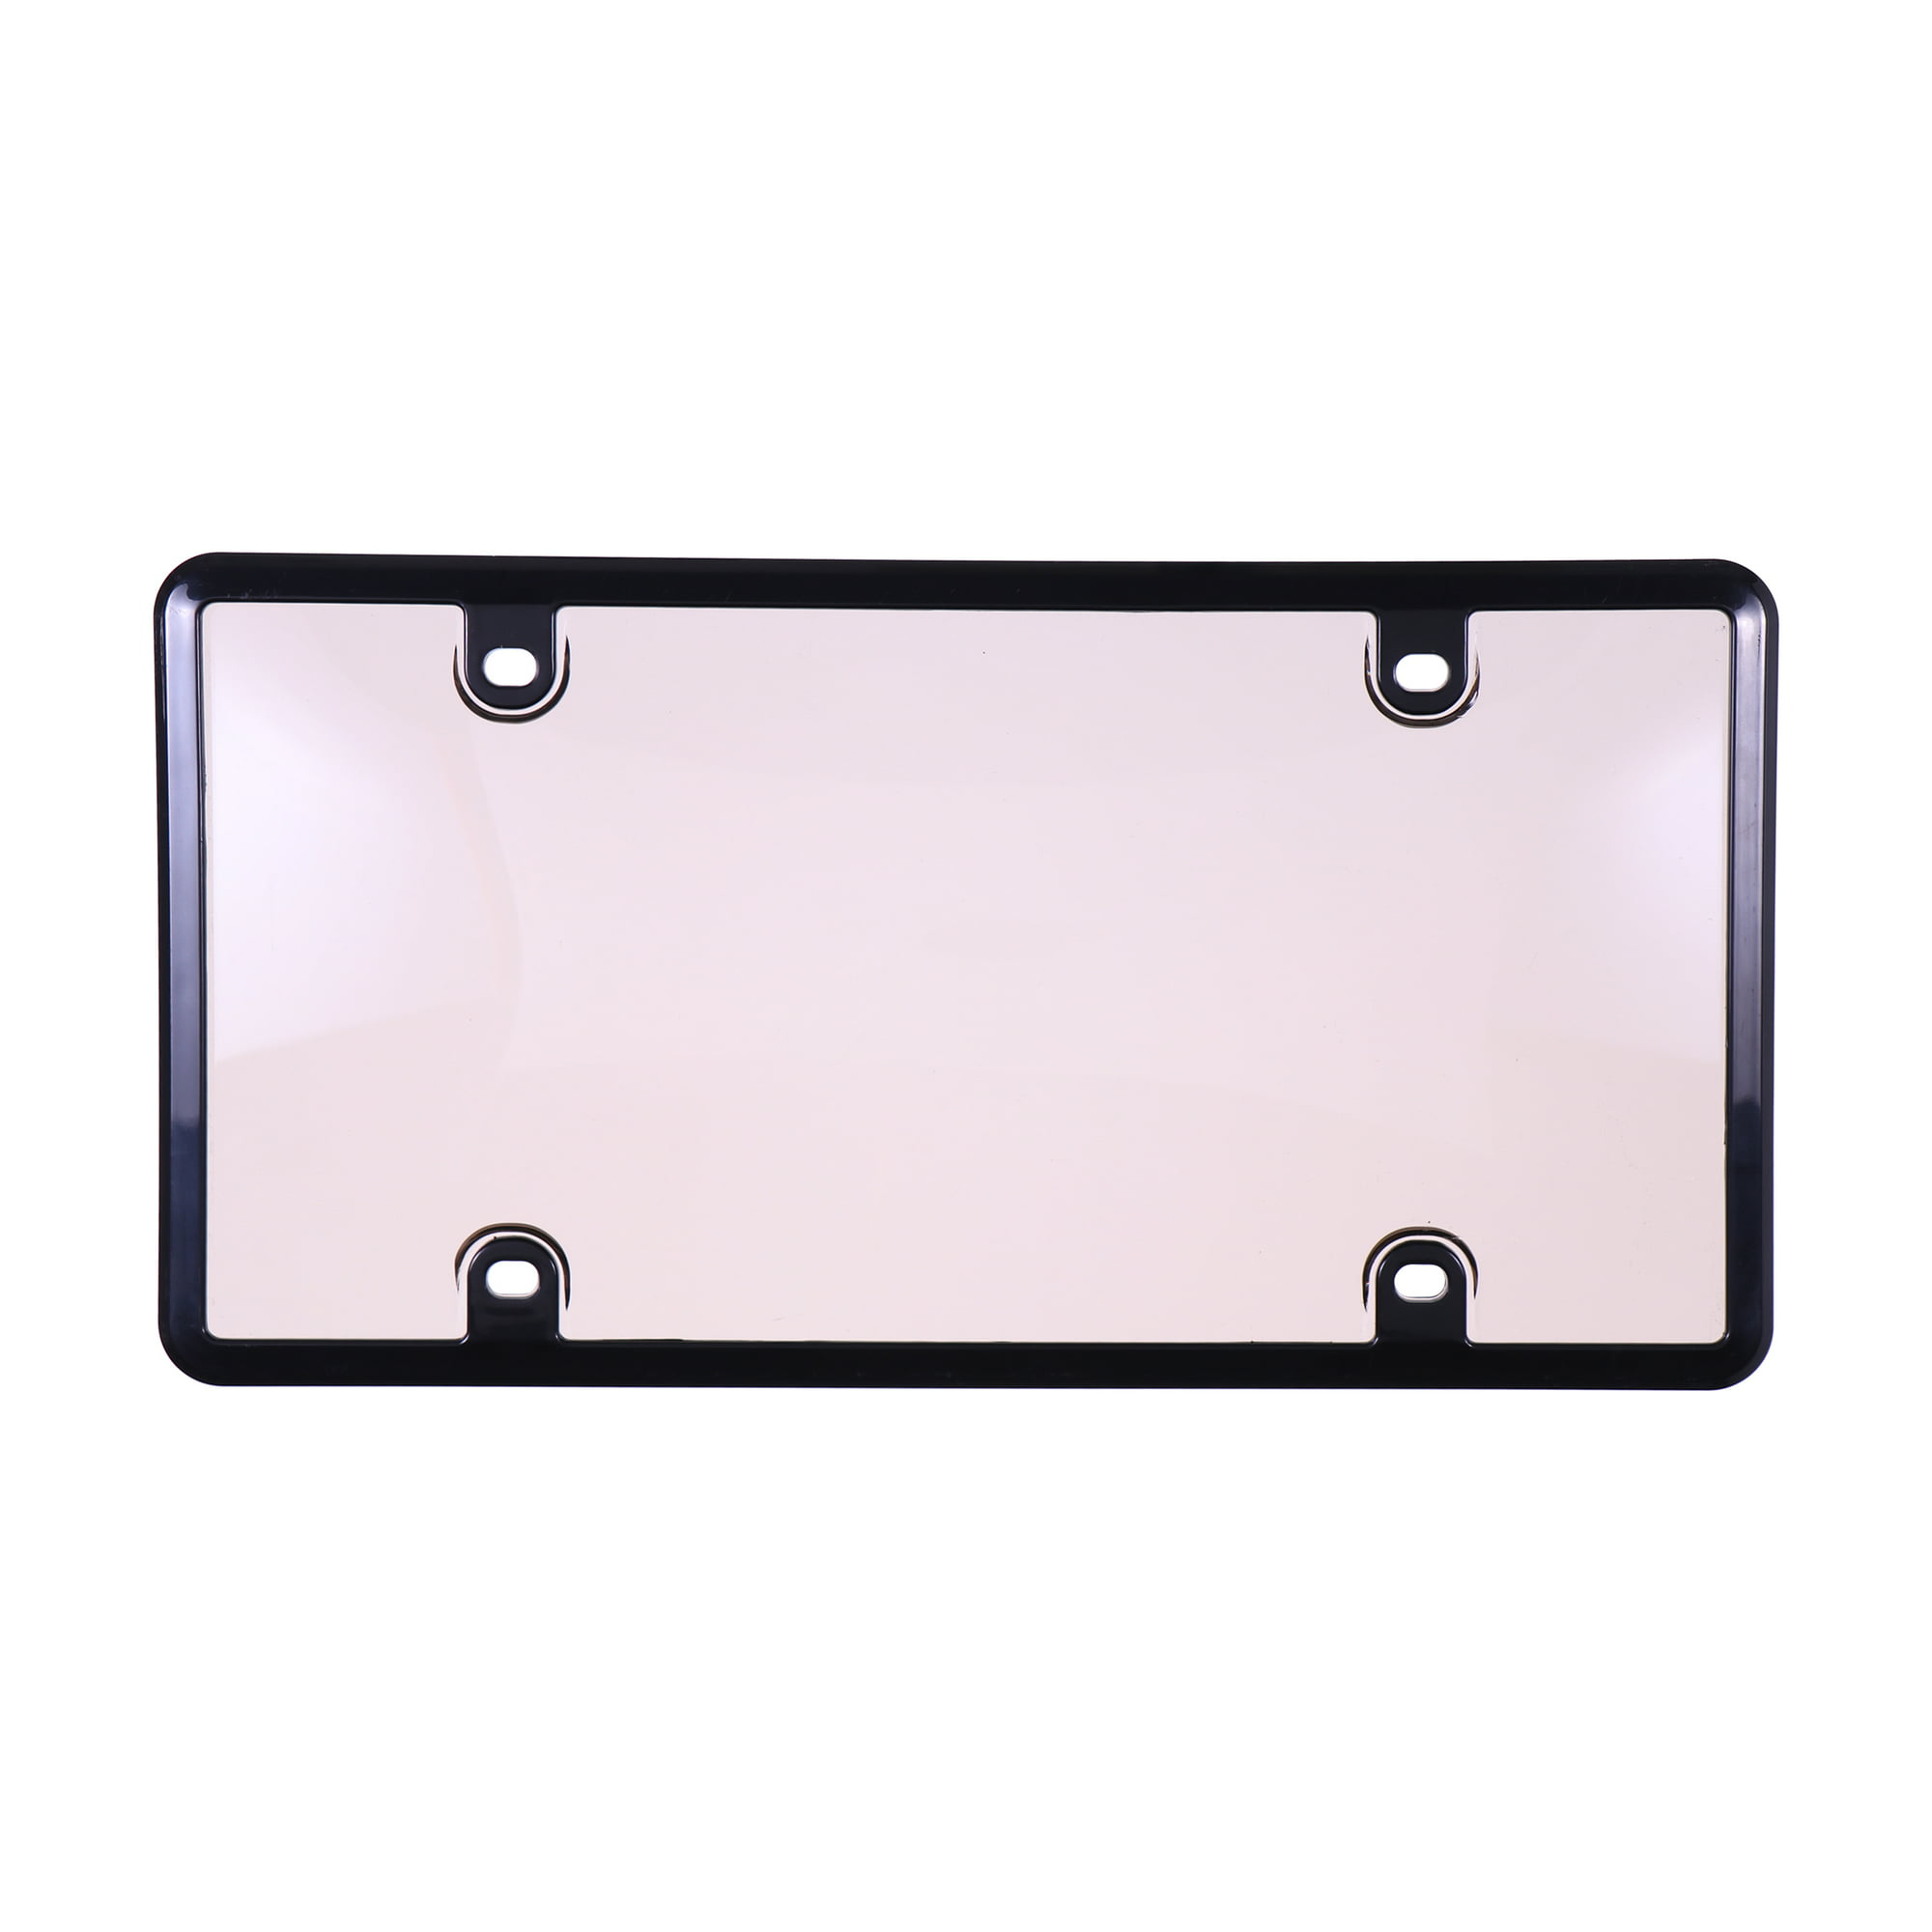 Auto Drive Universal Black Smoke Automotive License Plate Frame and Cover 